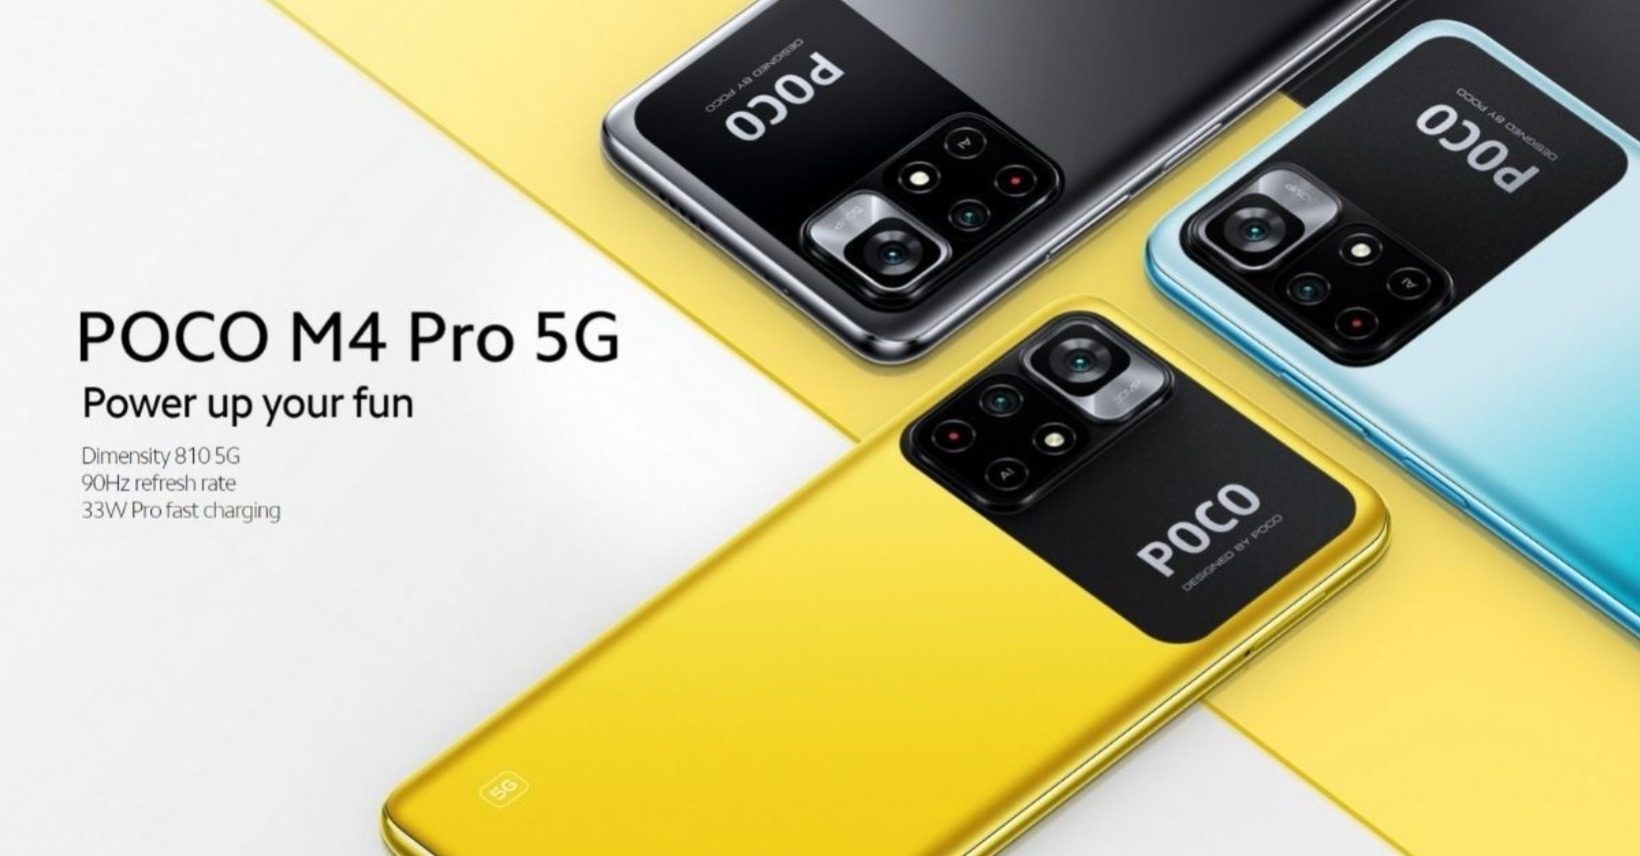 POCO M4 Pro 5G Announced with 90Hz Display, MediaTek 810 Chip, and More: Here’s Everything You Should Know